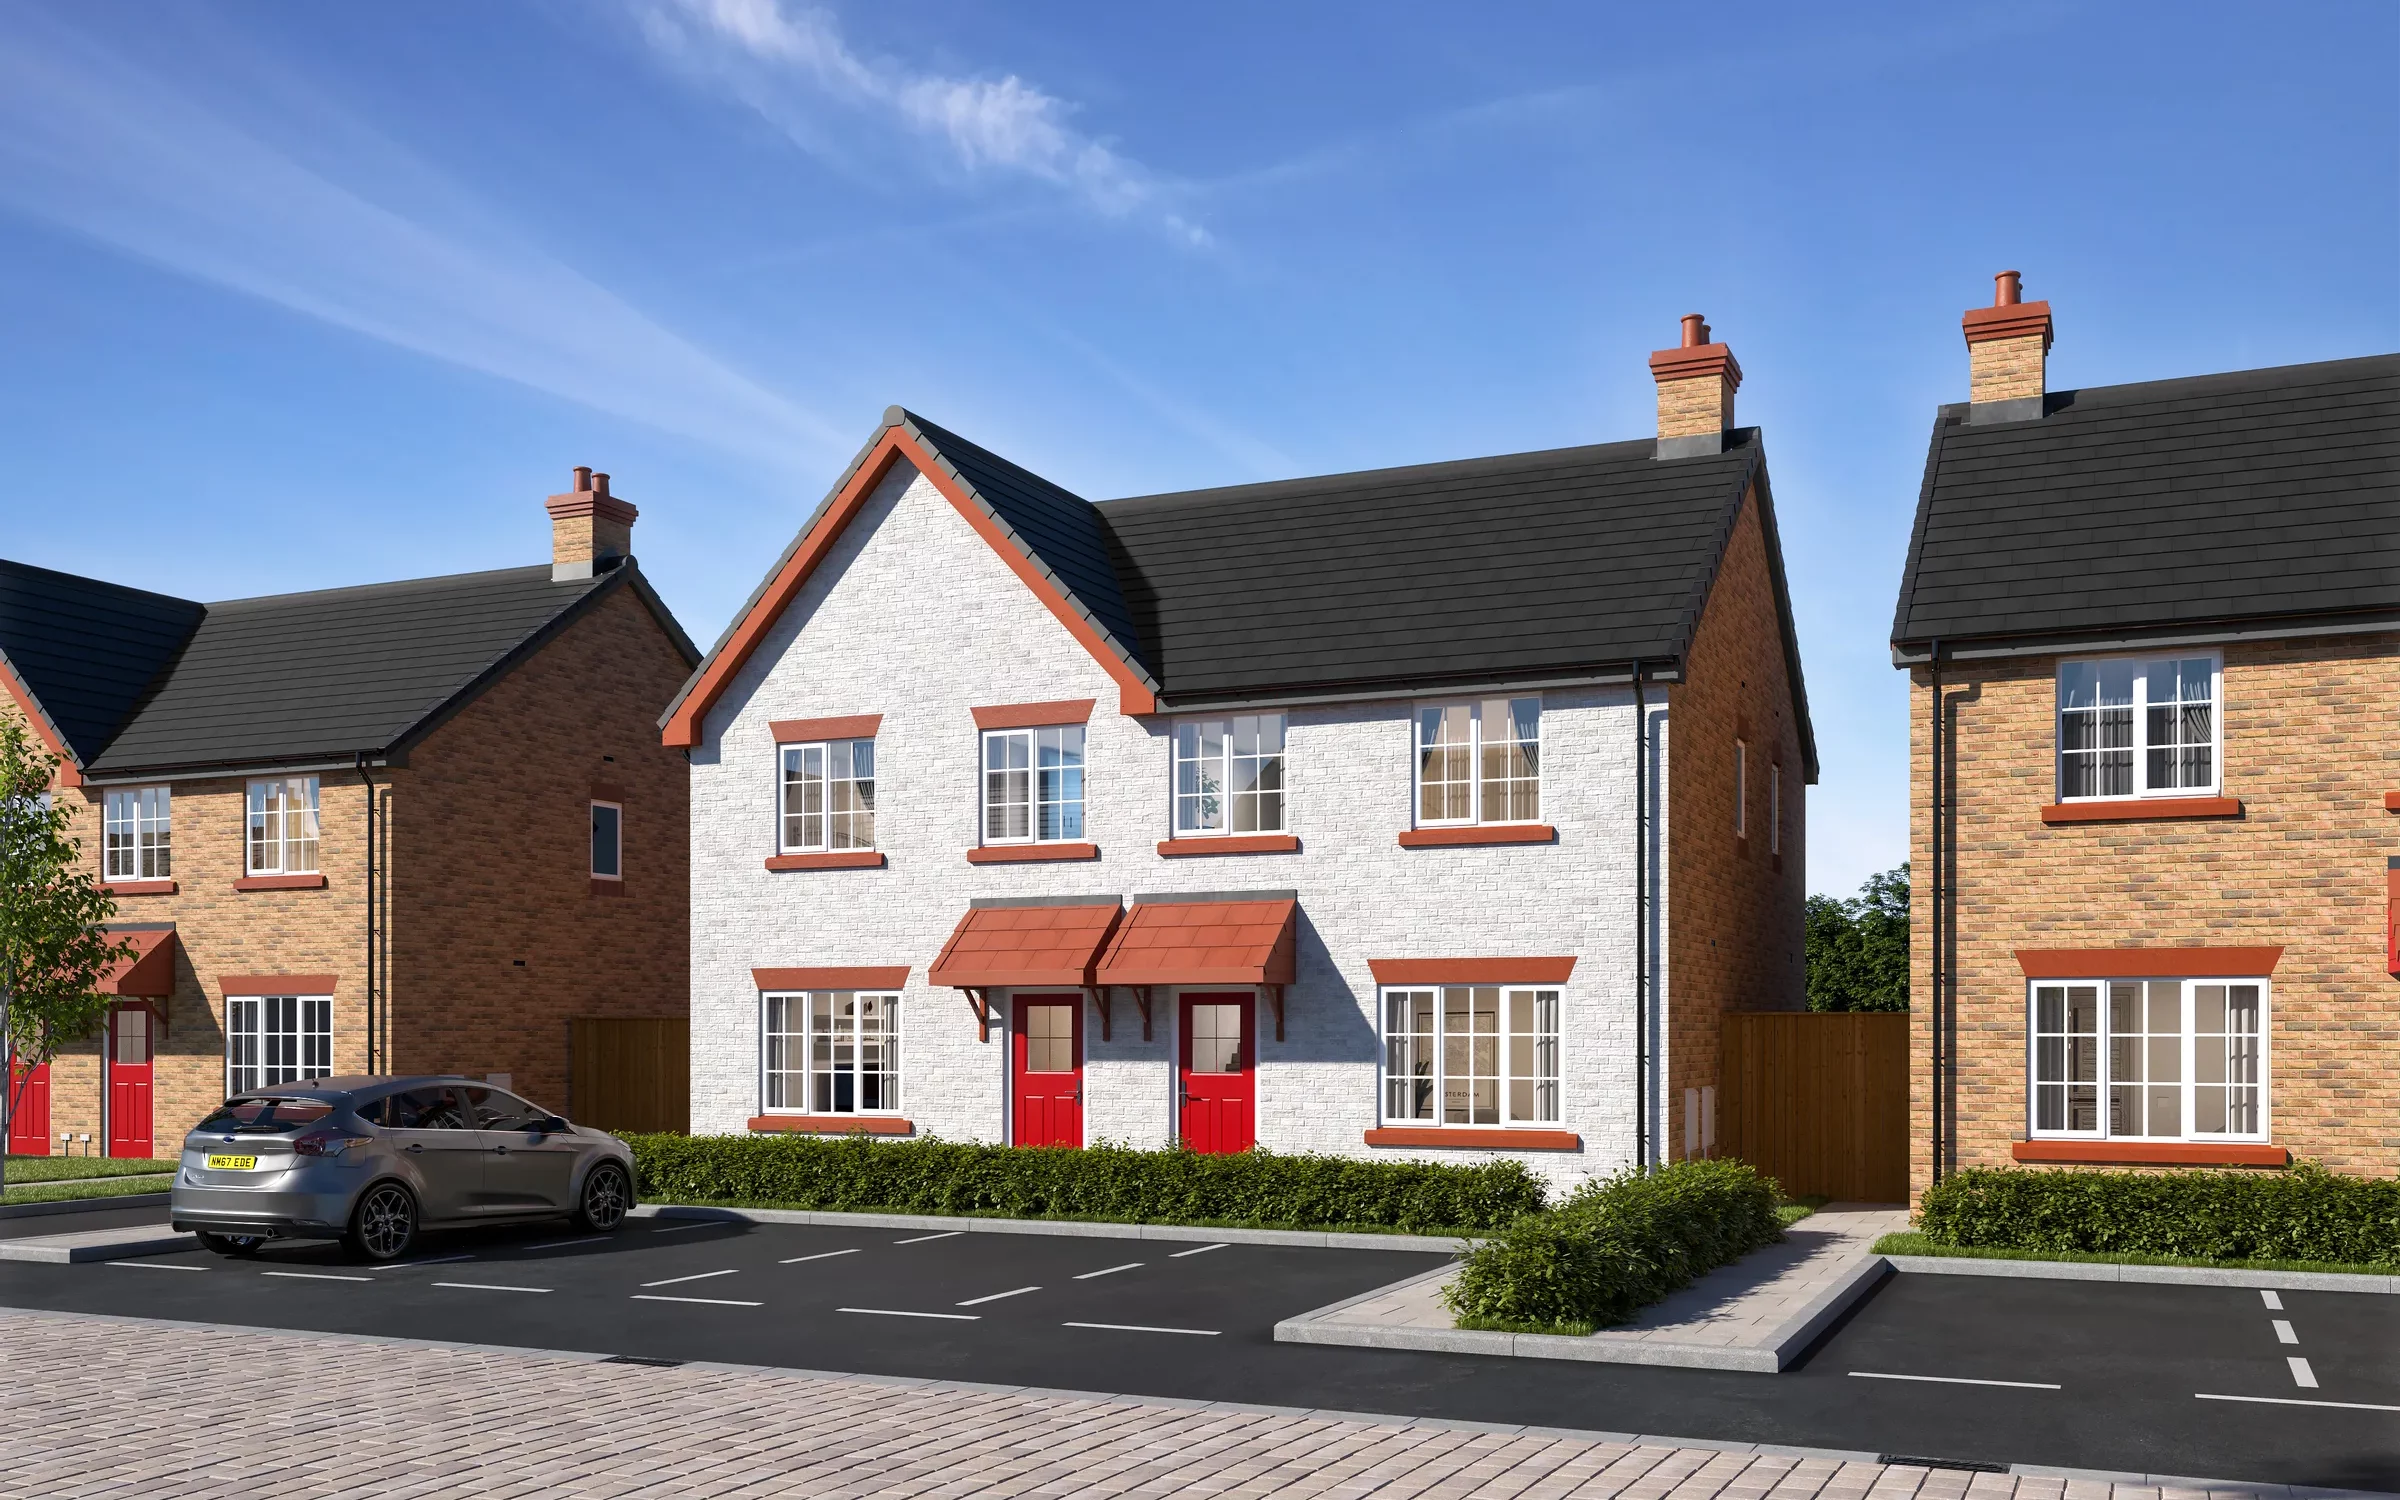 An image of Park Gate Village by Garden City Homes - available to purchase through Shared Ownership on Share to Buy!